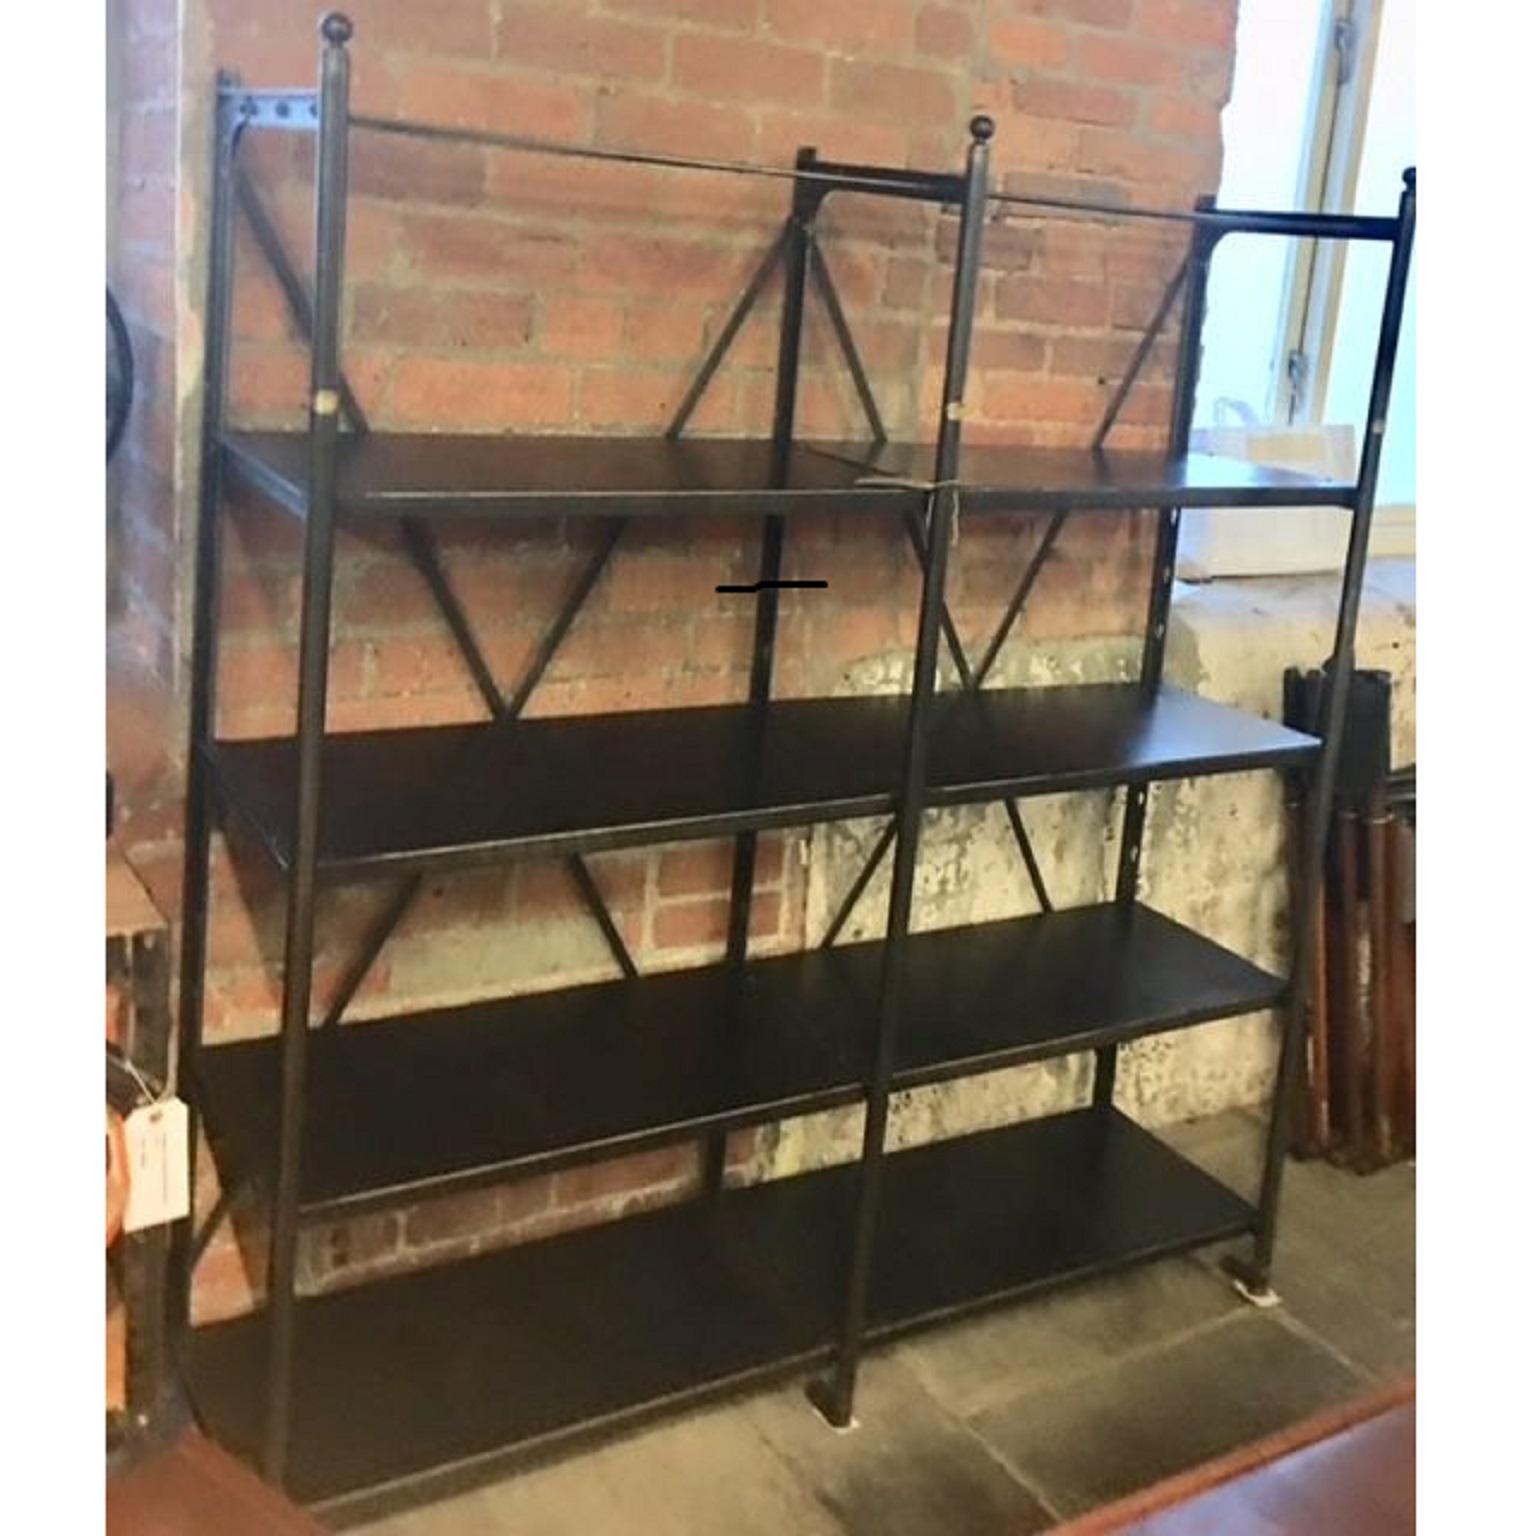 Industrial Shelving Unit made by Theodore Scherf, Paris. Would have once
been used in a textile factory. Steel Structure with capitals and feet. Brass 
plates that read: ‘T H SCHERF, 35 RUE D’ABOUKIR, PARIS’ 

Please note the shelves are not